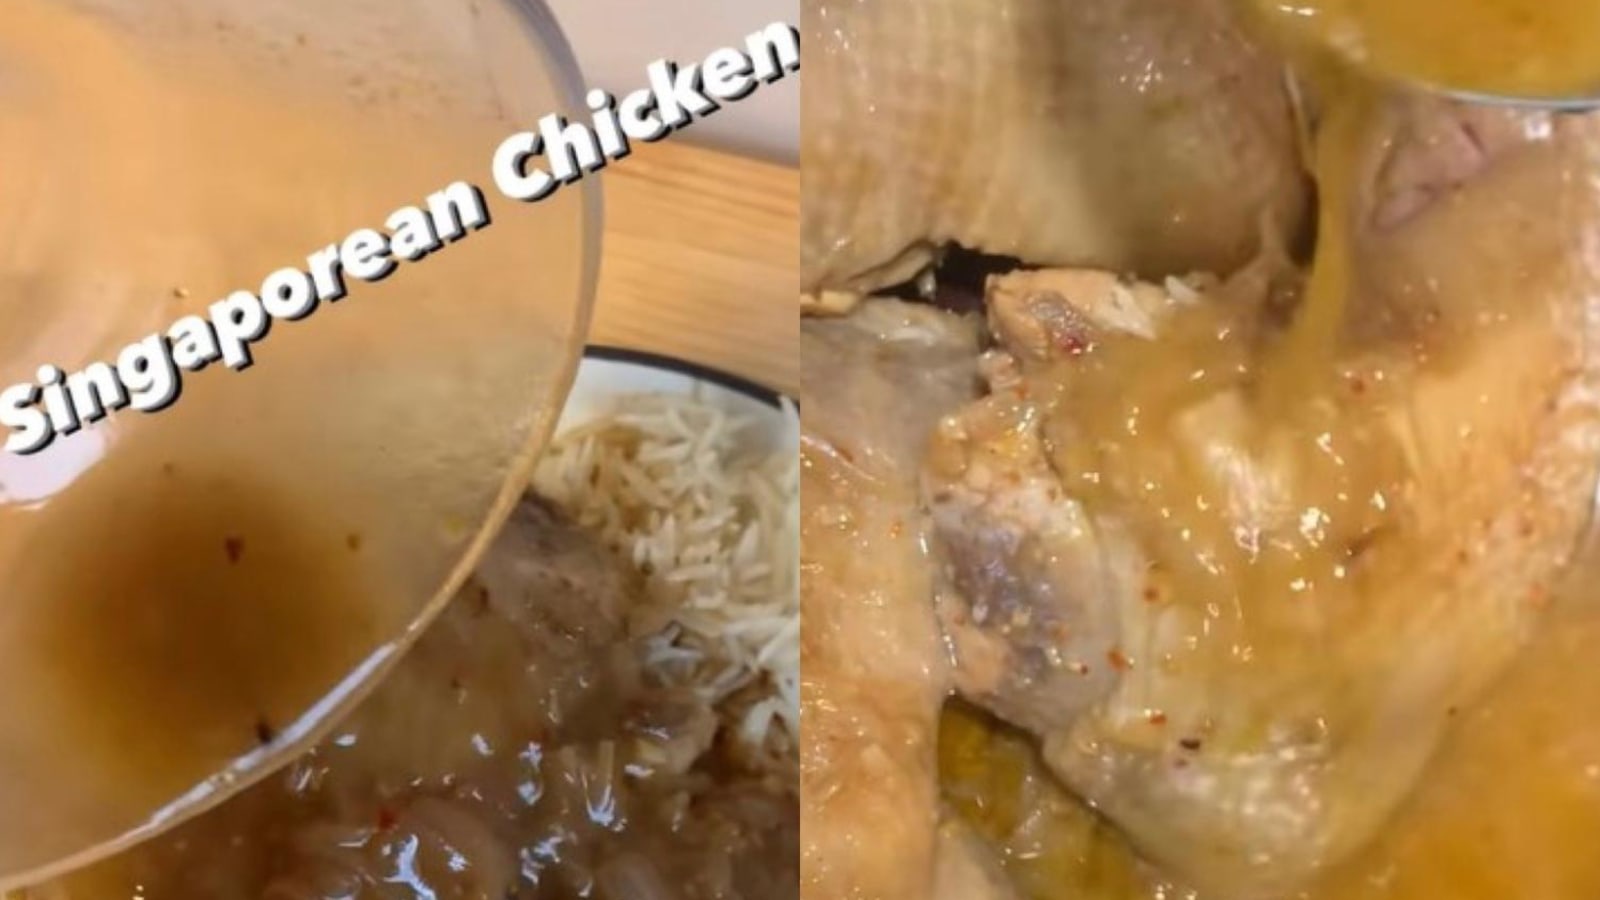 ‘That’s drain water’: New York Times’ Singaporean Chicken Curry recipe gets slammed